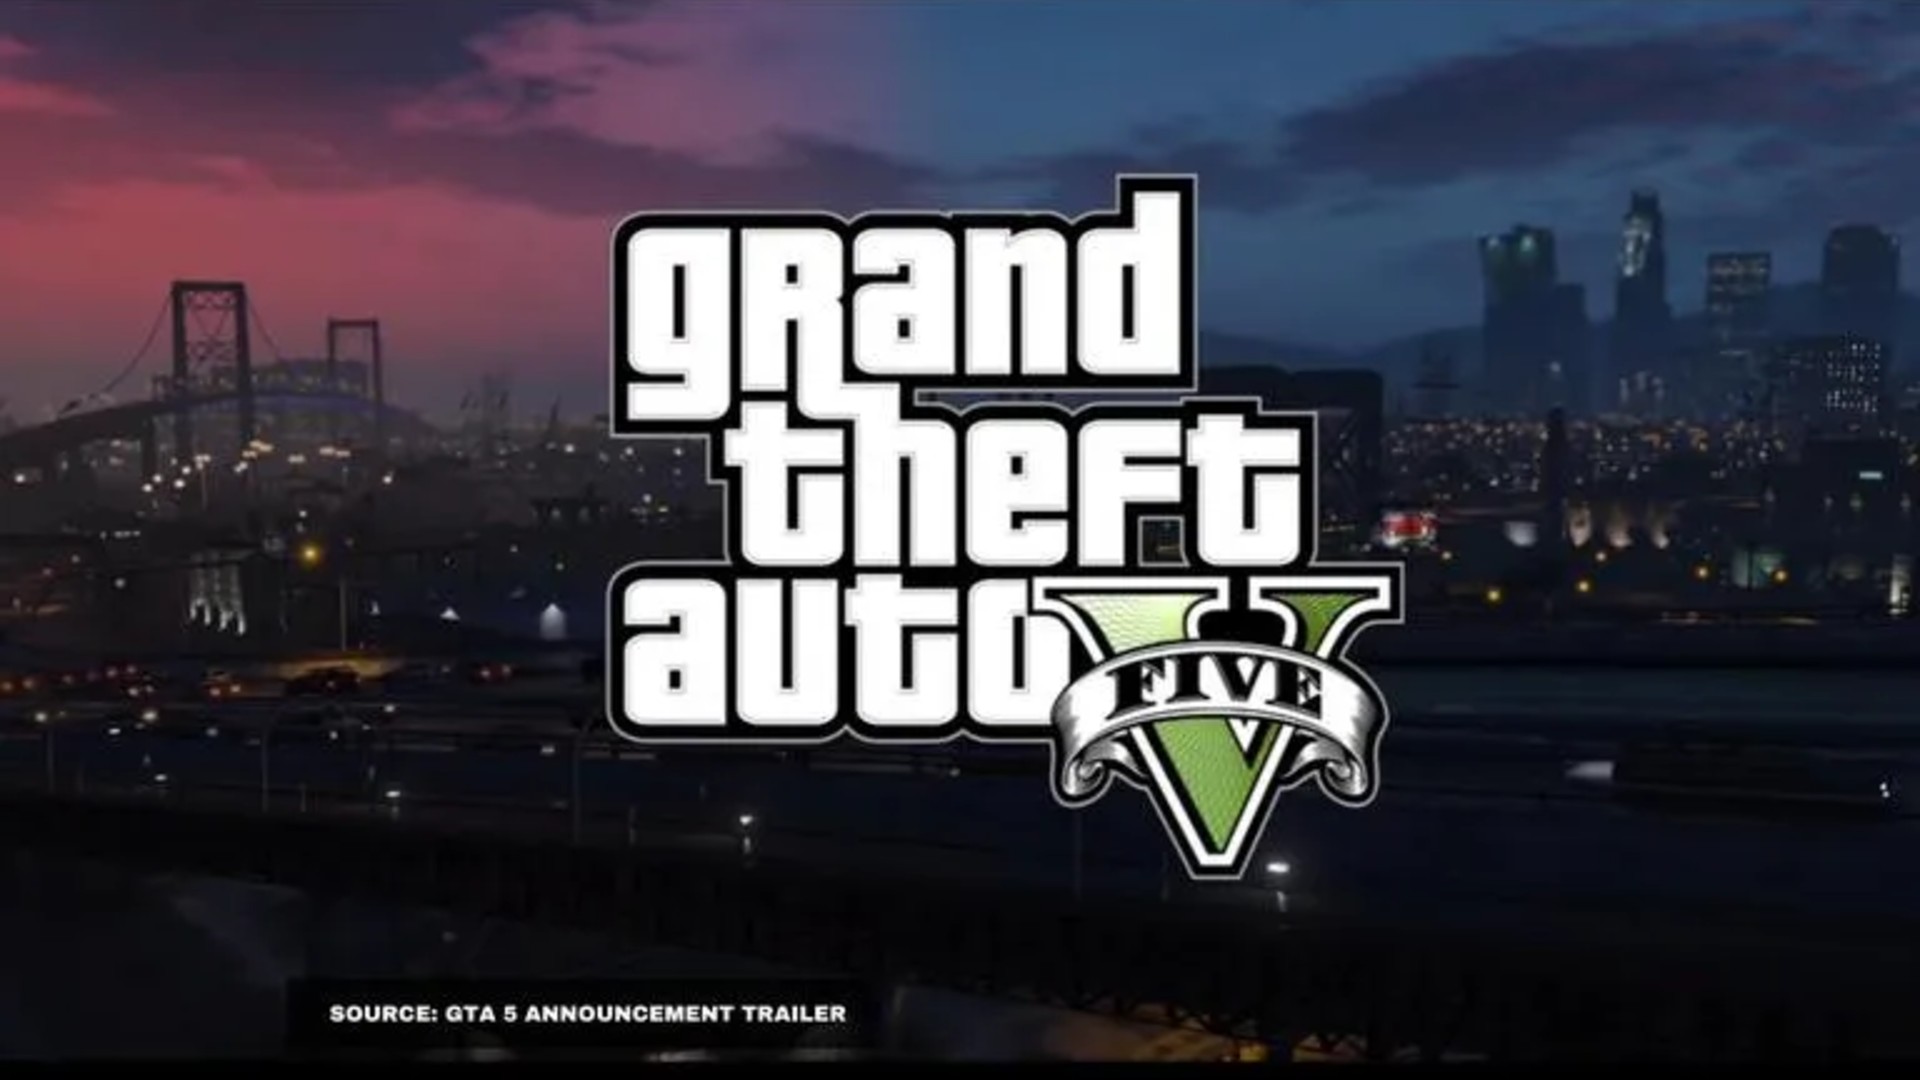 Gta 5 Can Be Played Using A Remote Play On Android Devices, But How?